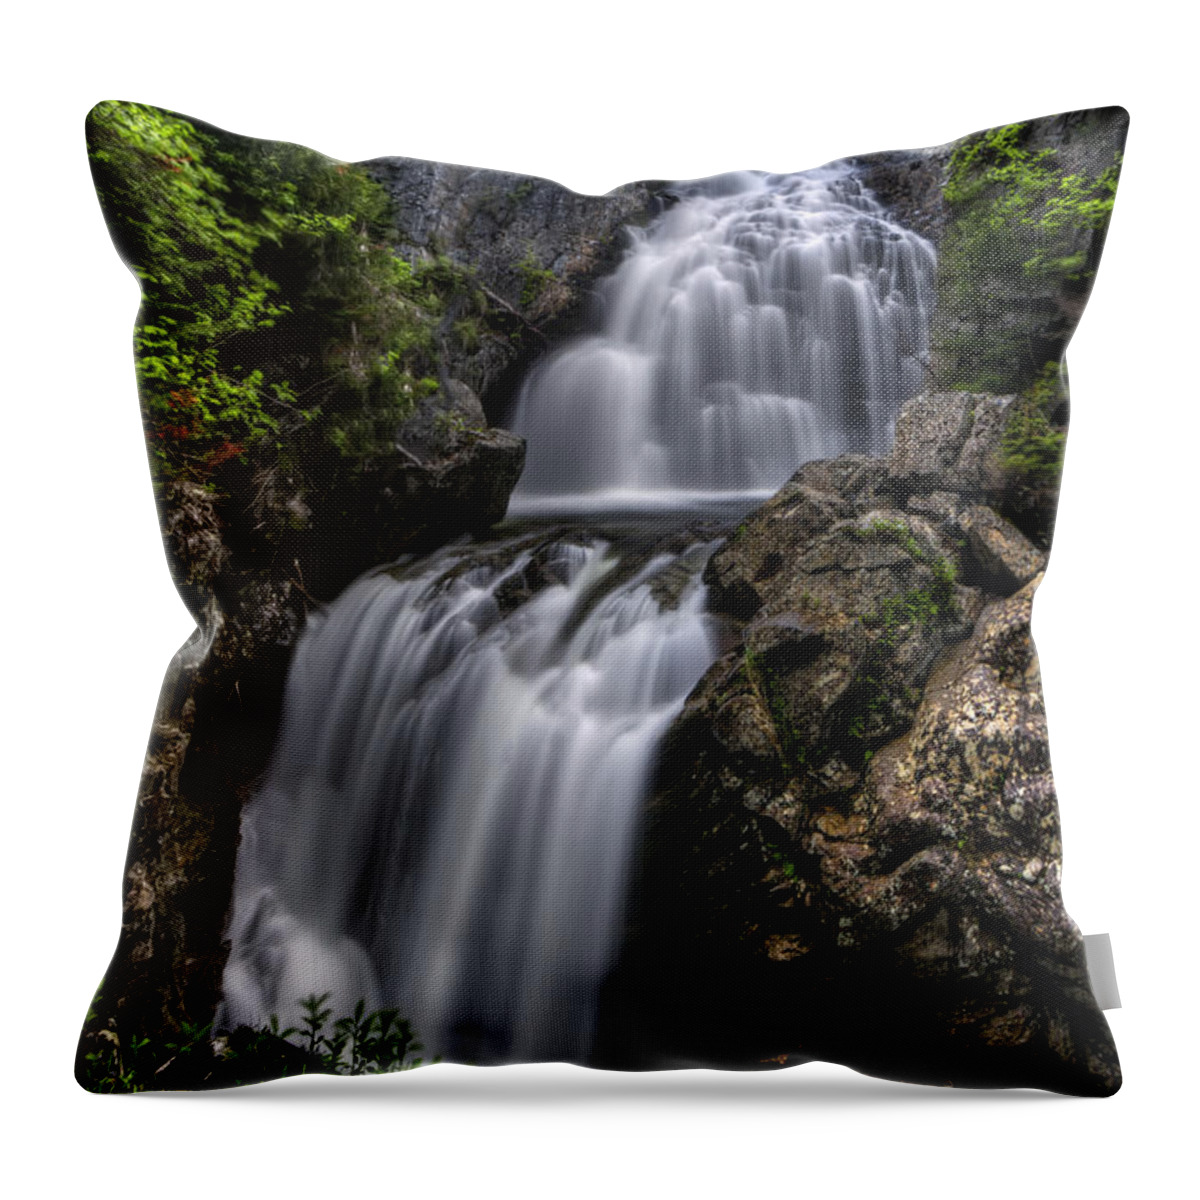 New Hampshire Throw Pillow featuring the photograph Crystal Cascade in Pinkham Notch by White Mountain Images